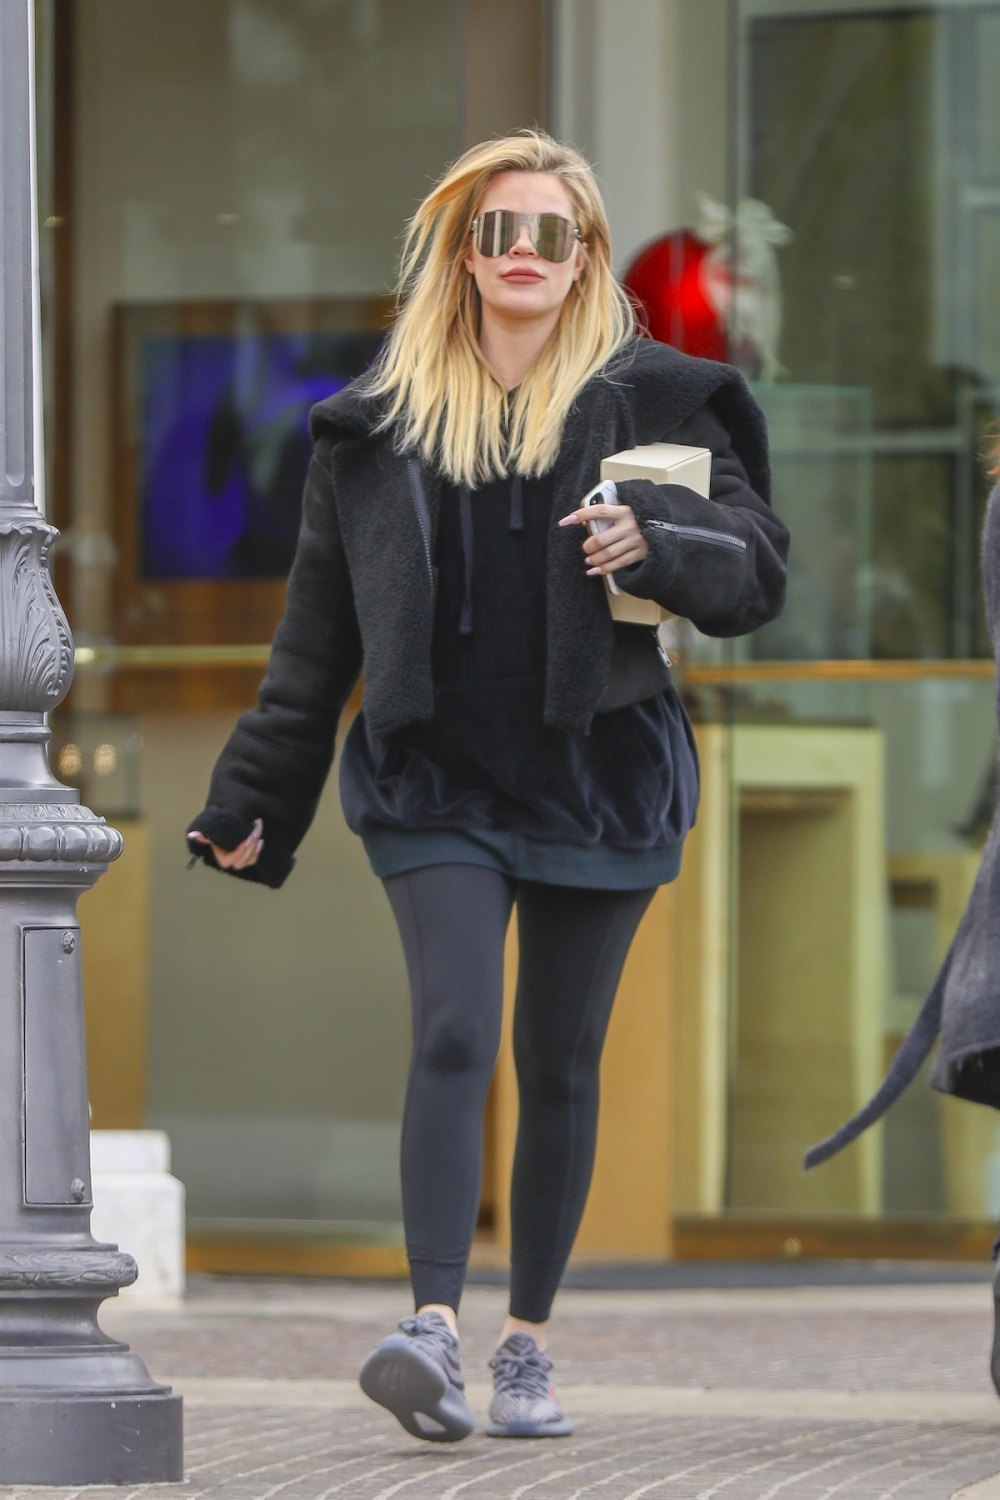 Khloe Kardashian hides her baby bump while out at Polacheck's Jewelers in Calabasas on December 23.